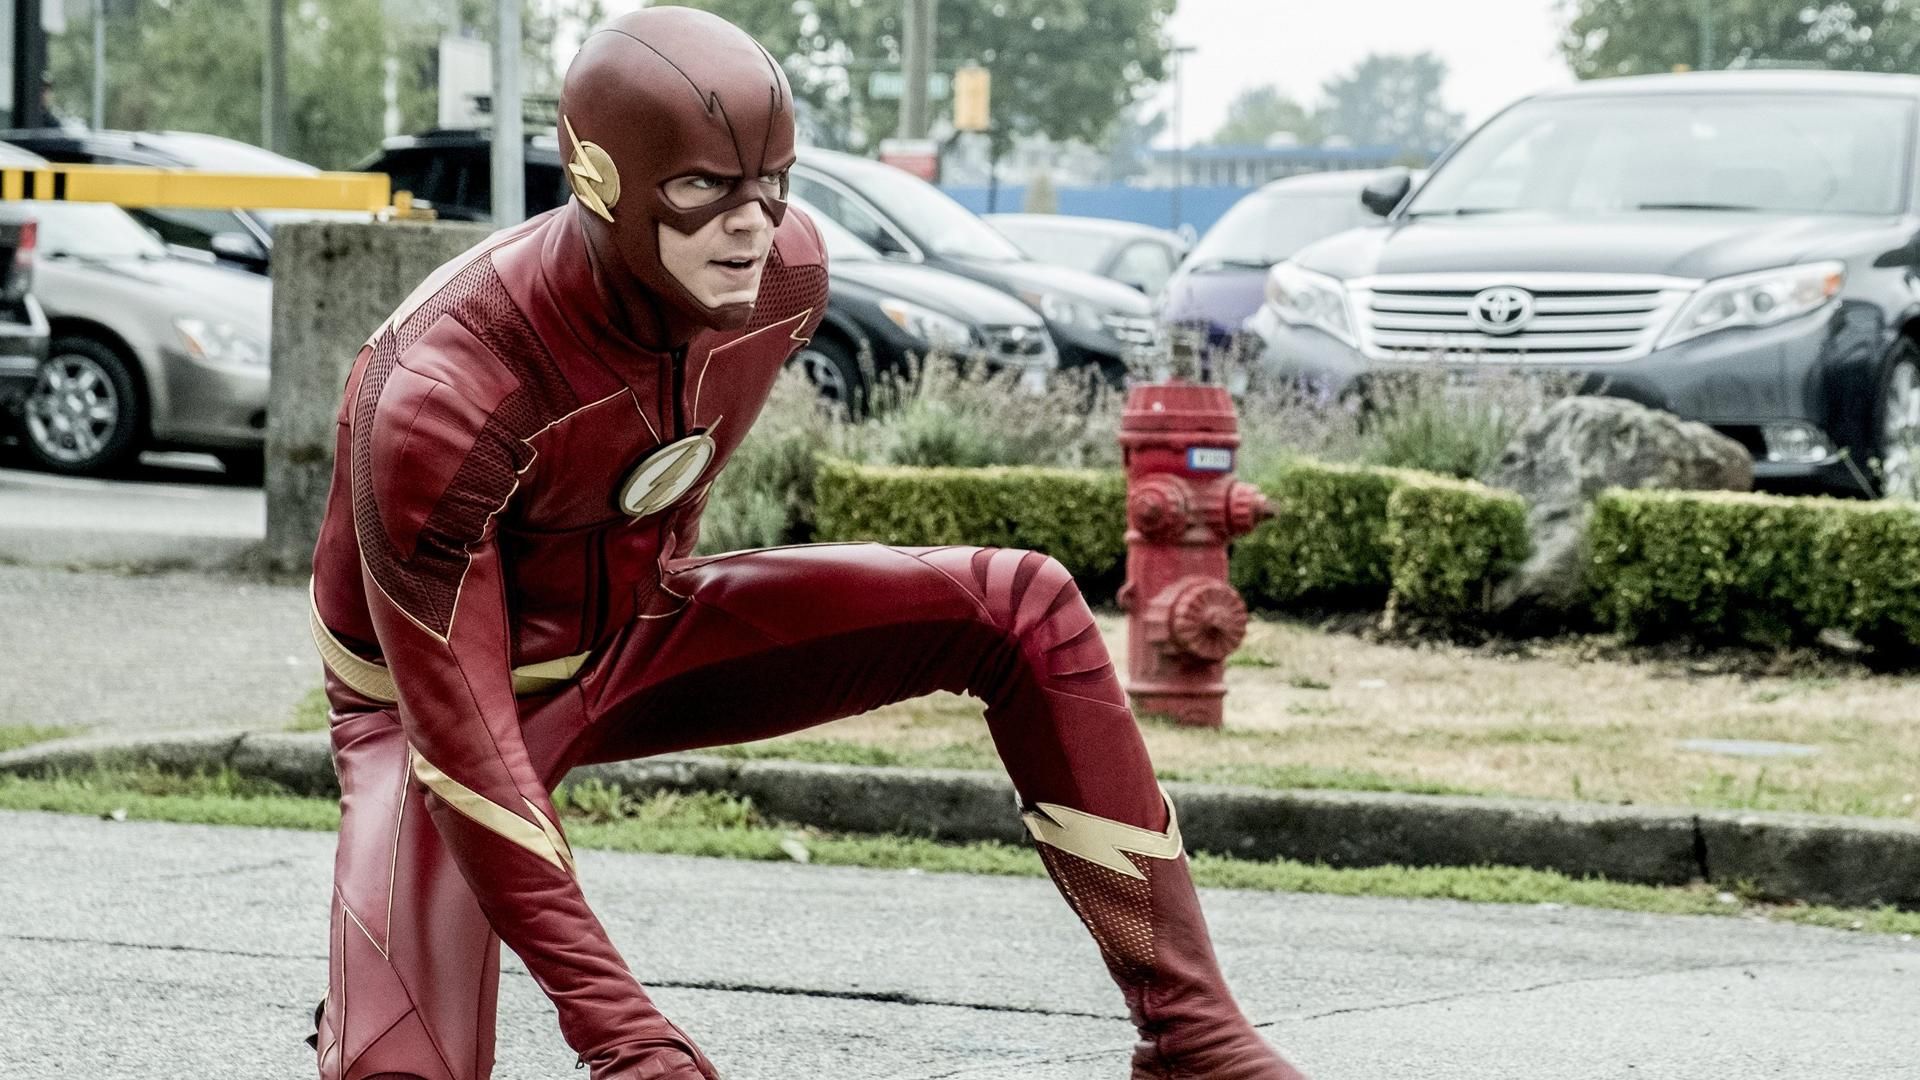 "The Flash" Season 4 episode 15 proves Barry Allen is the...